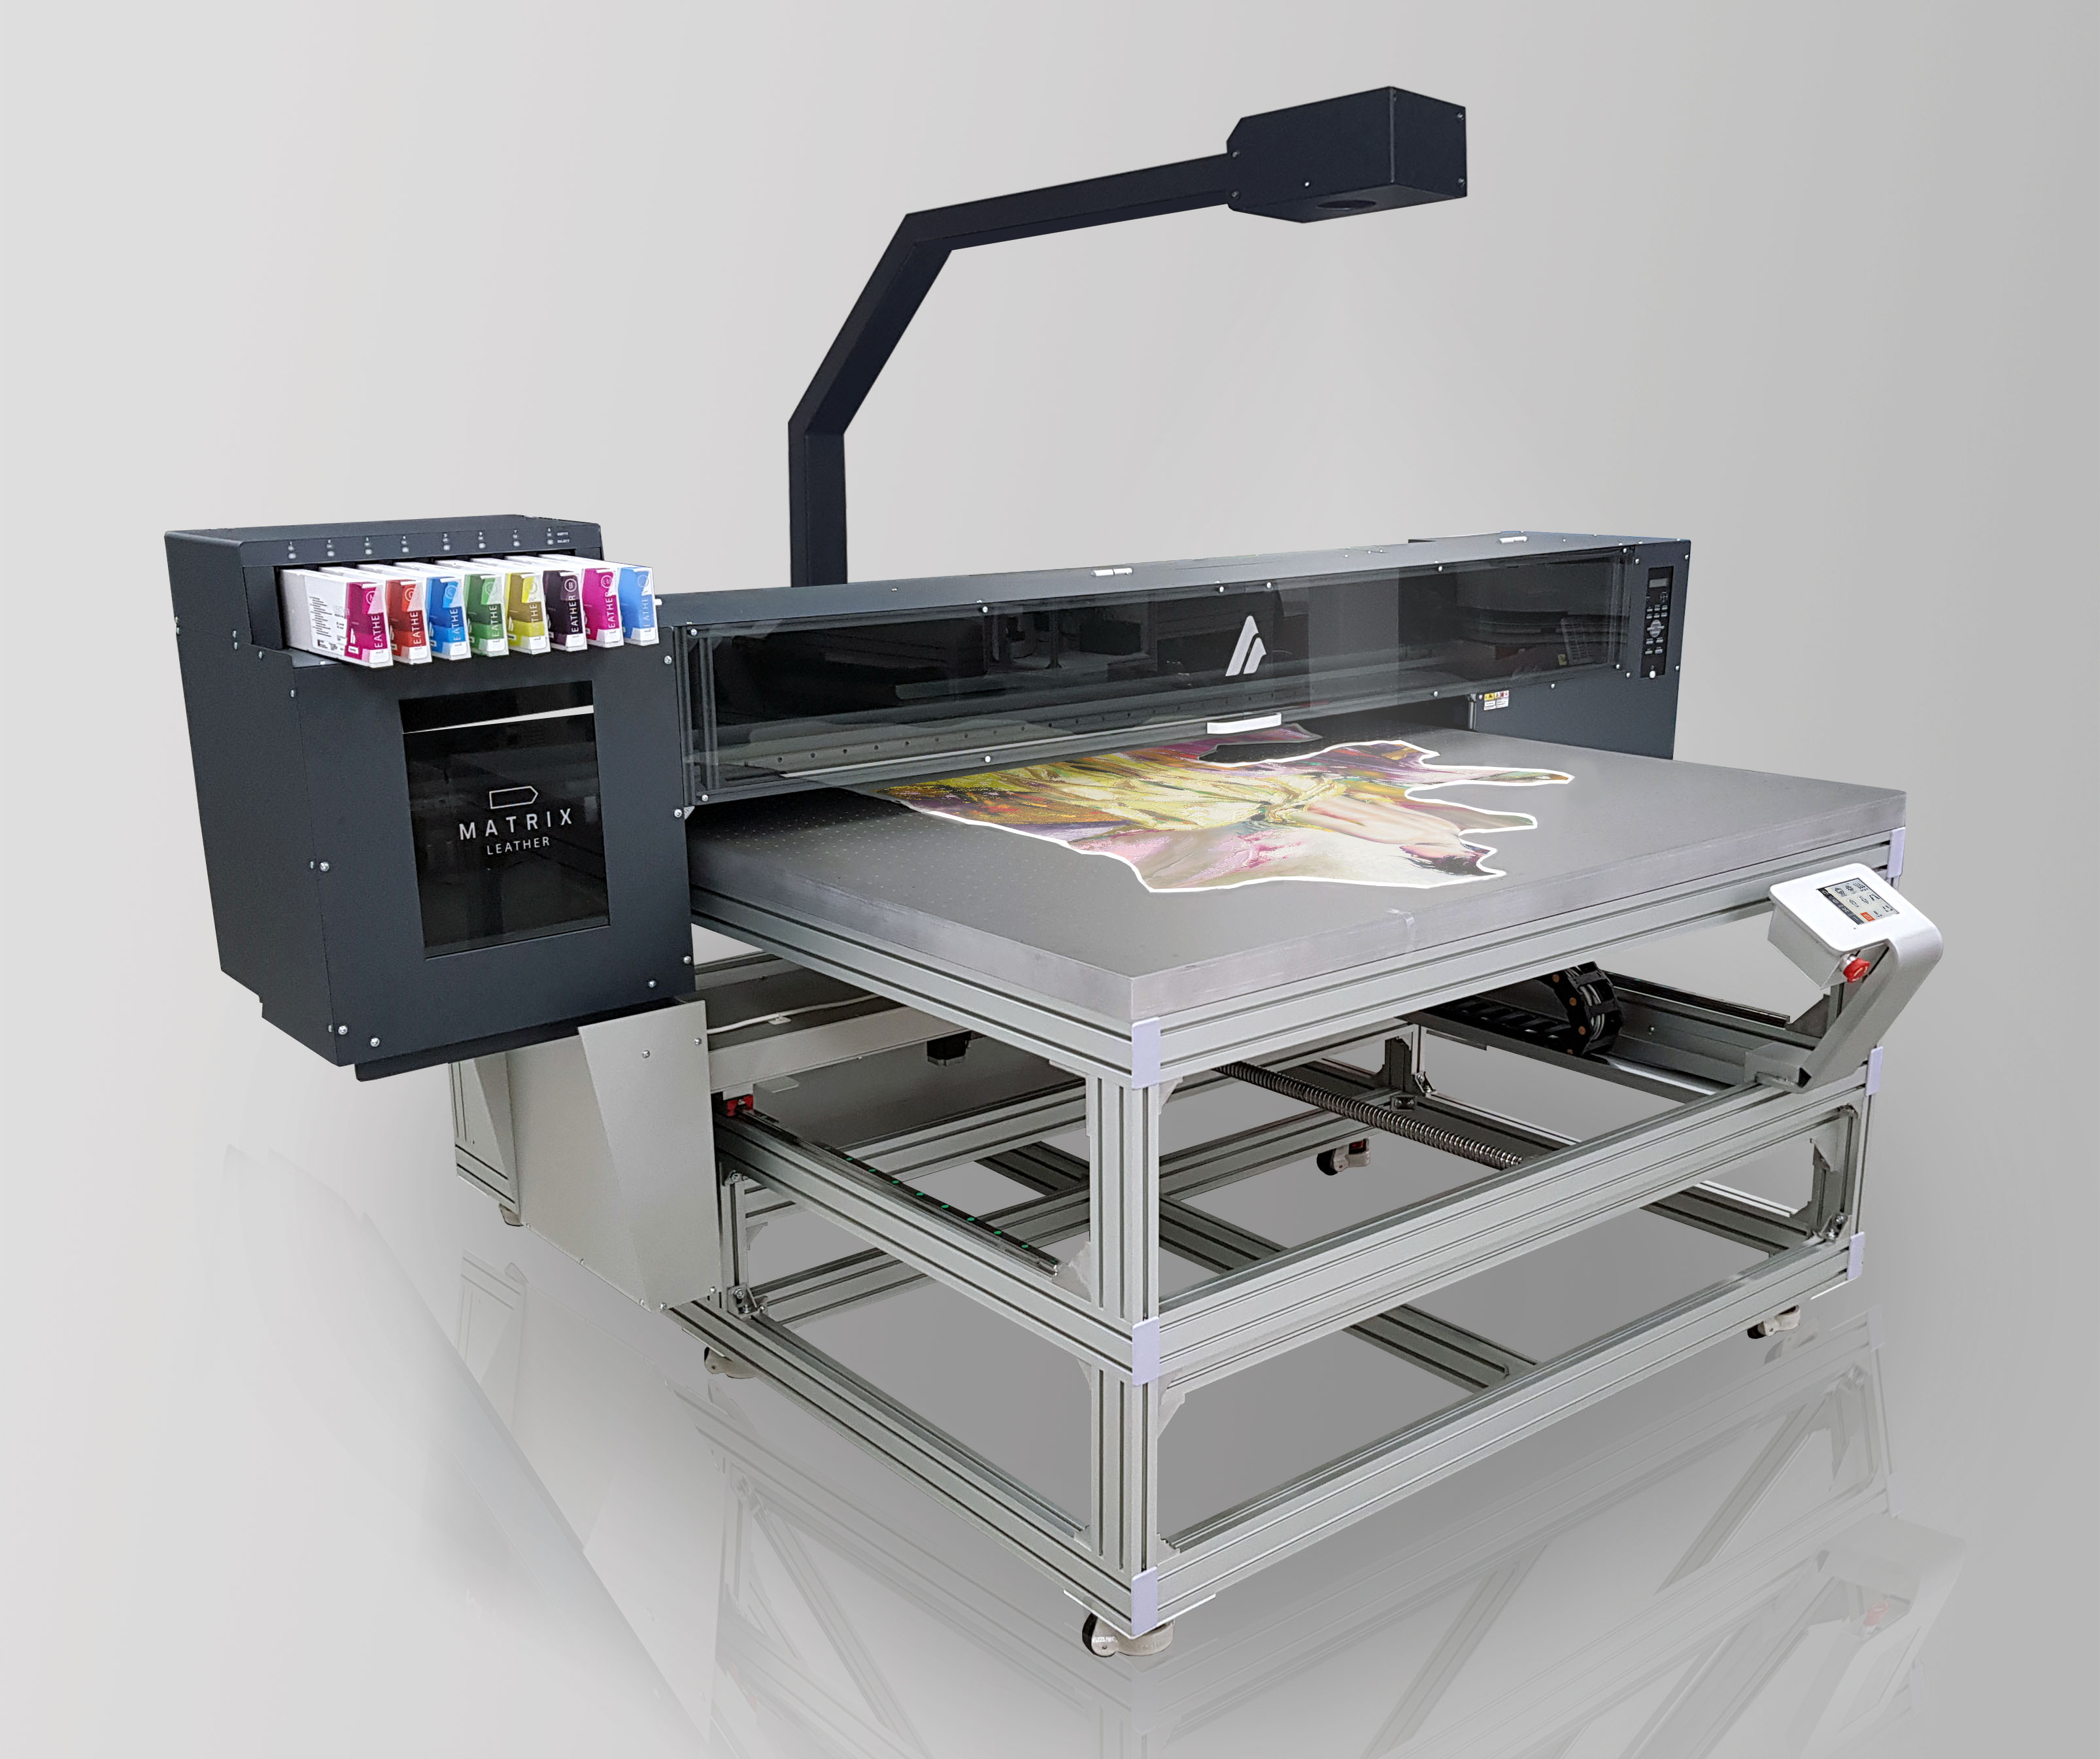 Azonprinter has announced the Azon Matrix Leather direct-to-substrate press